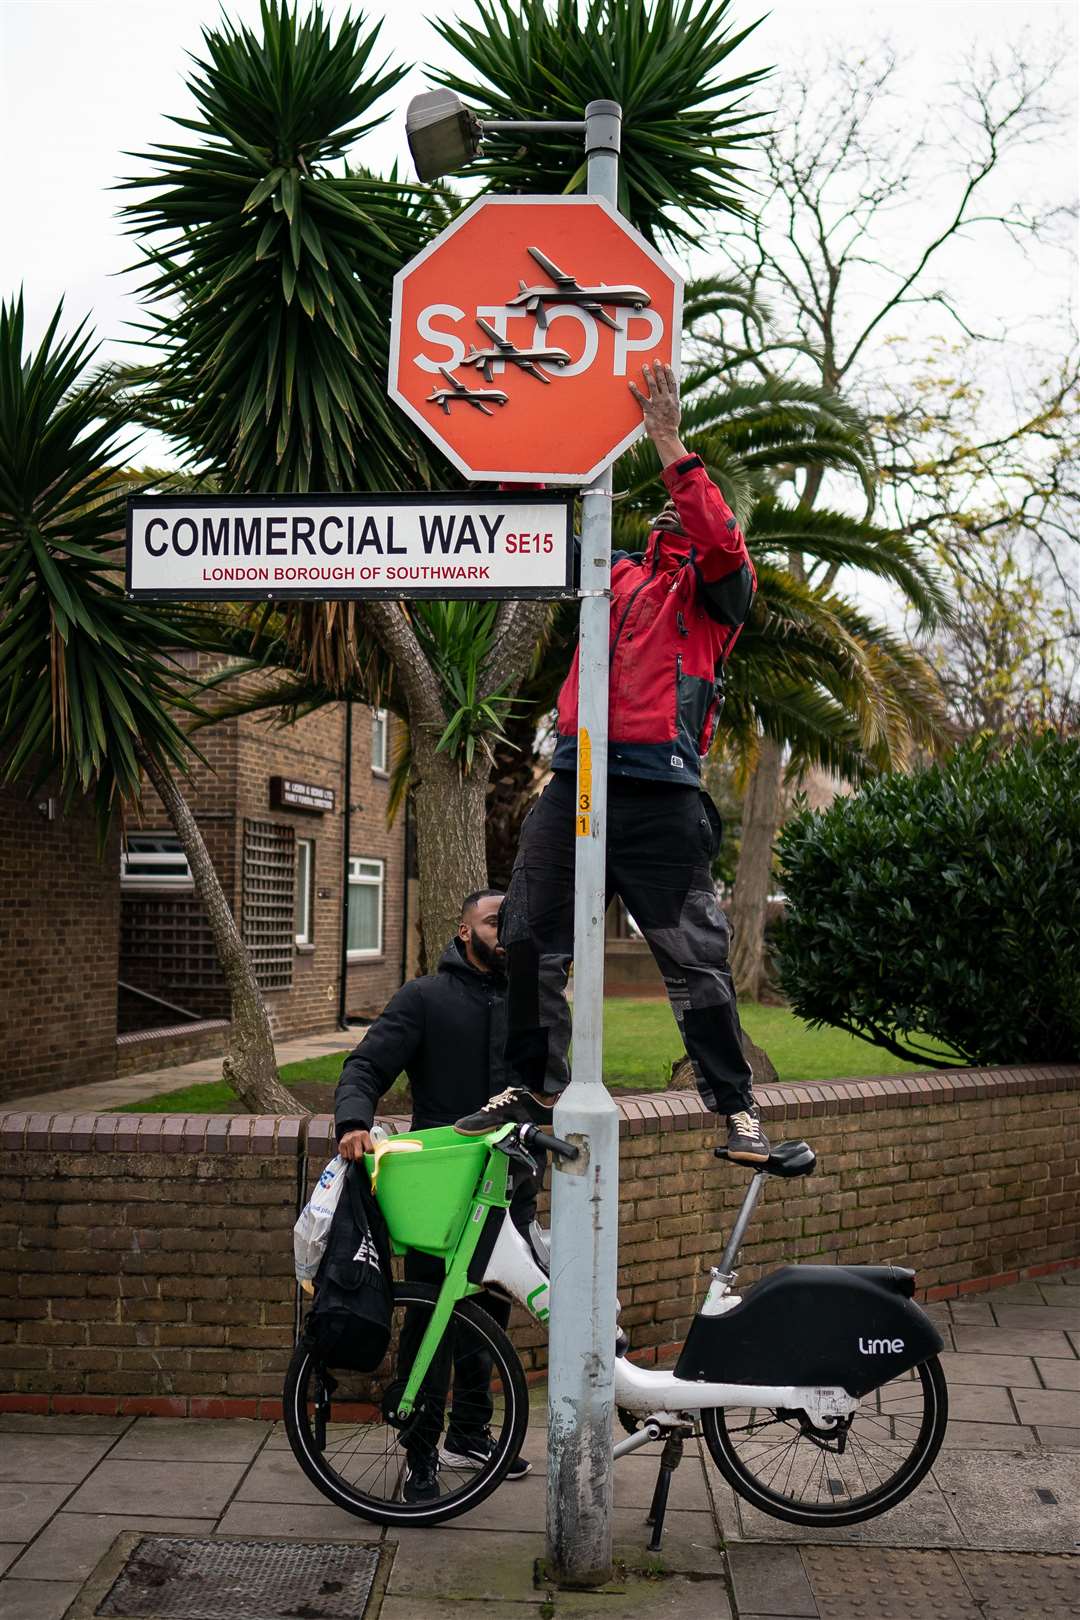 A person removes an artwork by Banksy, which was unveiled at the intersection of Southampton Way and Commercial Way in Peckham, south-east London (Aaron Chown/PA)